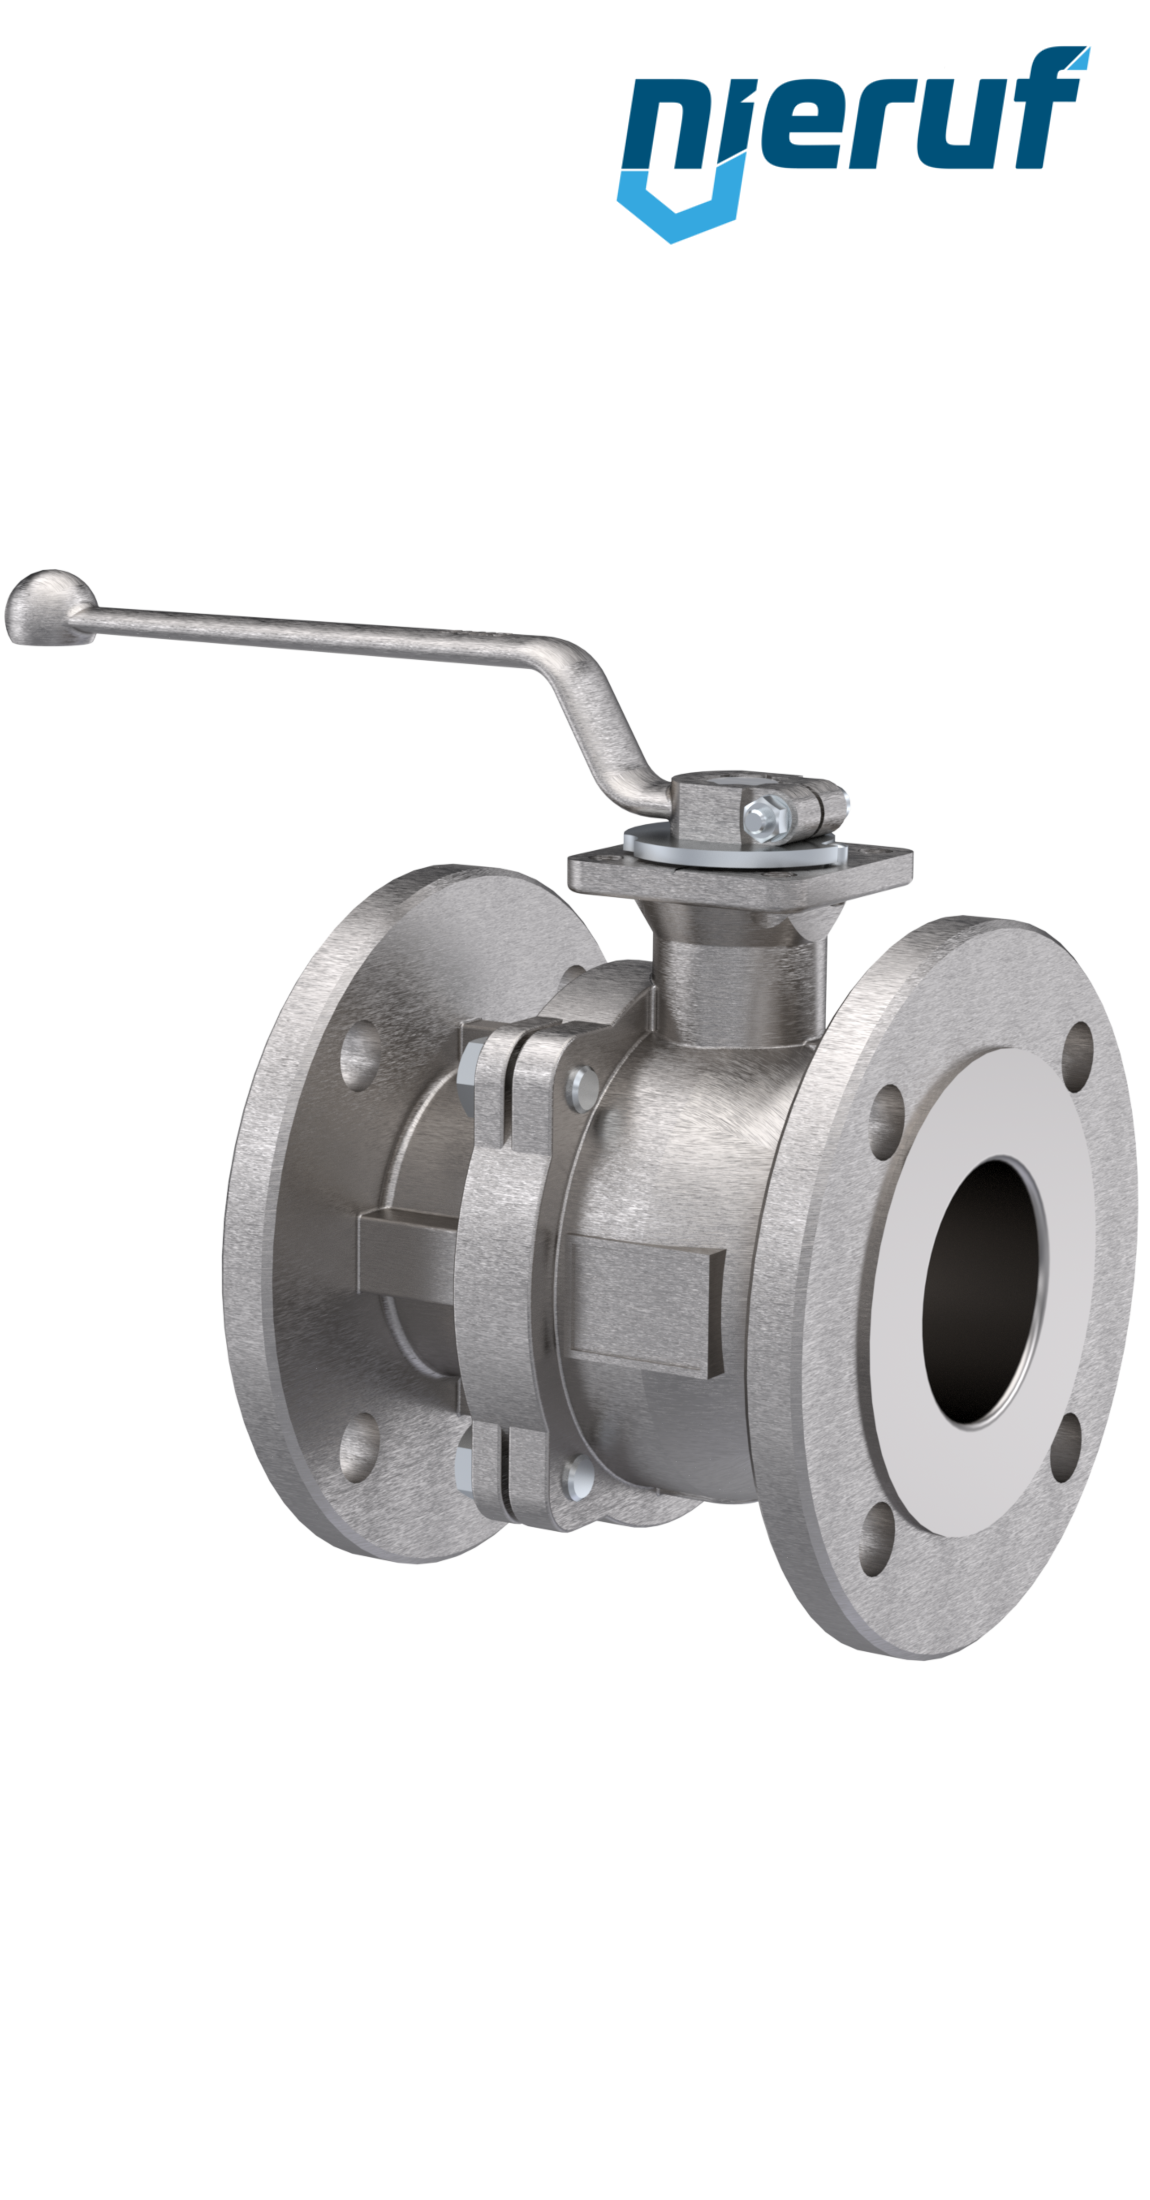 Gas-flange ball valve FK05 DN40 PN40 made of stainless steel 1.4408